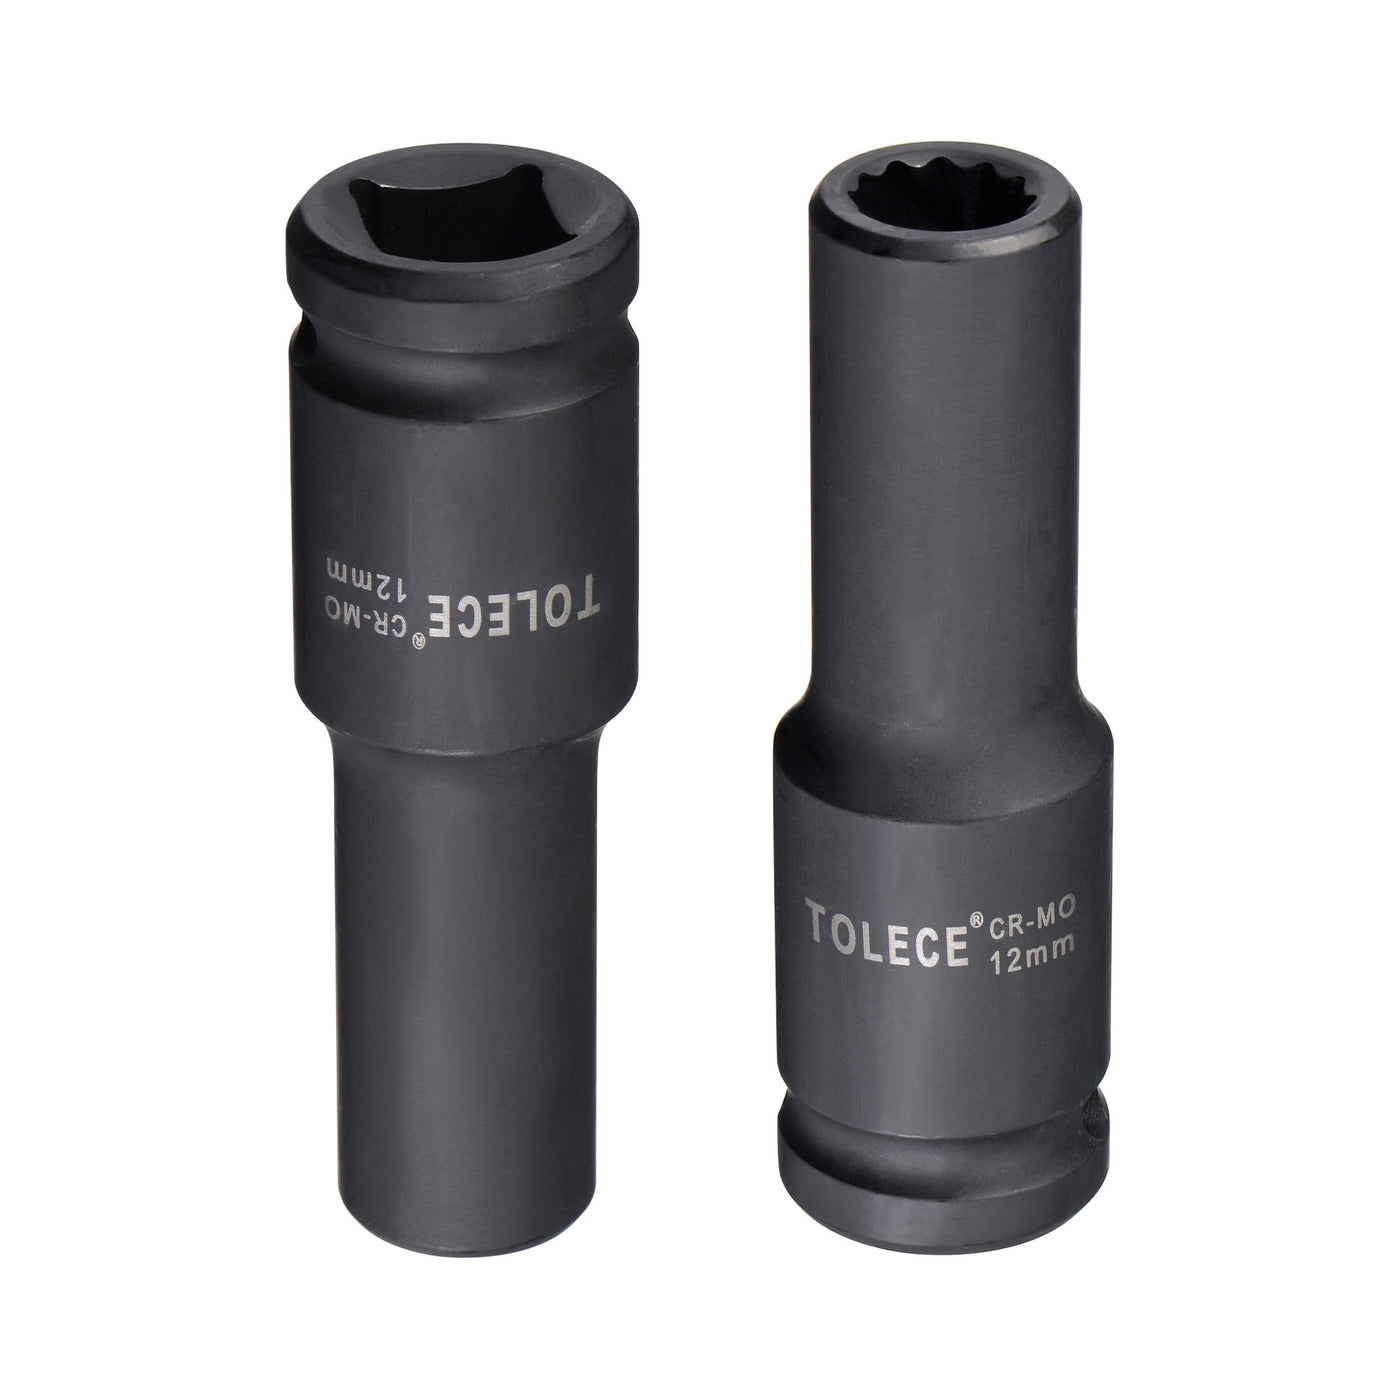 uxcell Uxcell 1/2-Inch Drive 12mm 12-Point Deep Impact Socket, CR-MO Steel 78mm Length, Metric